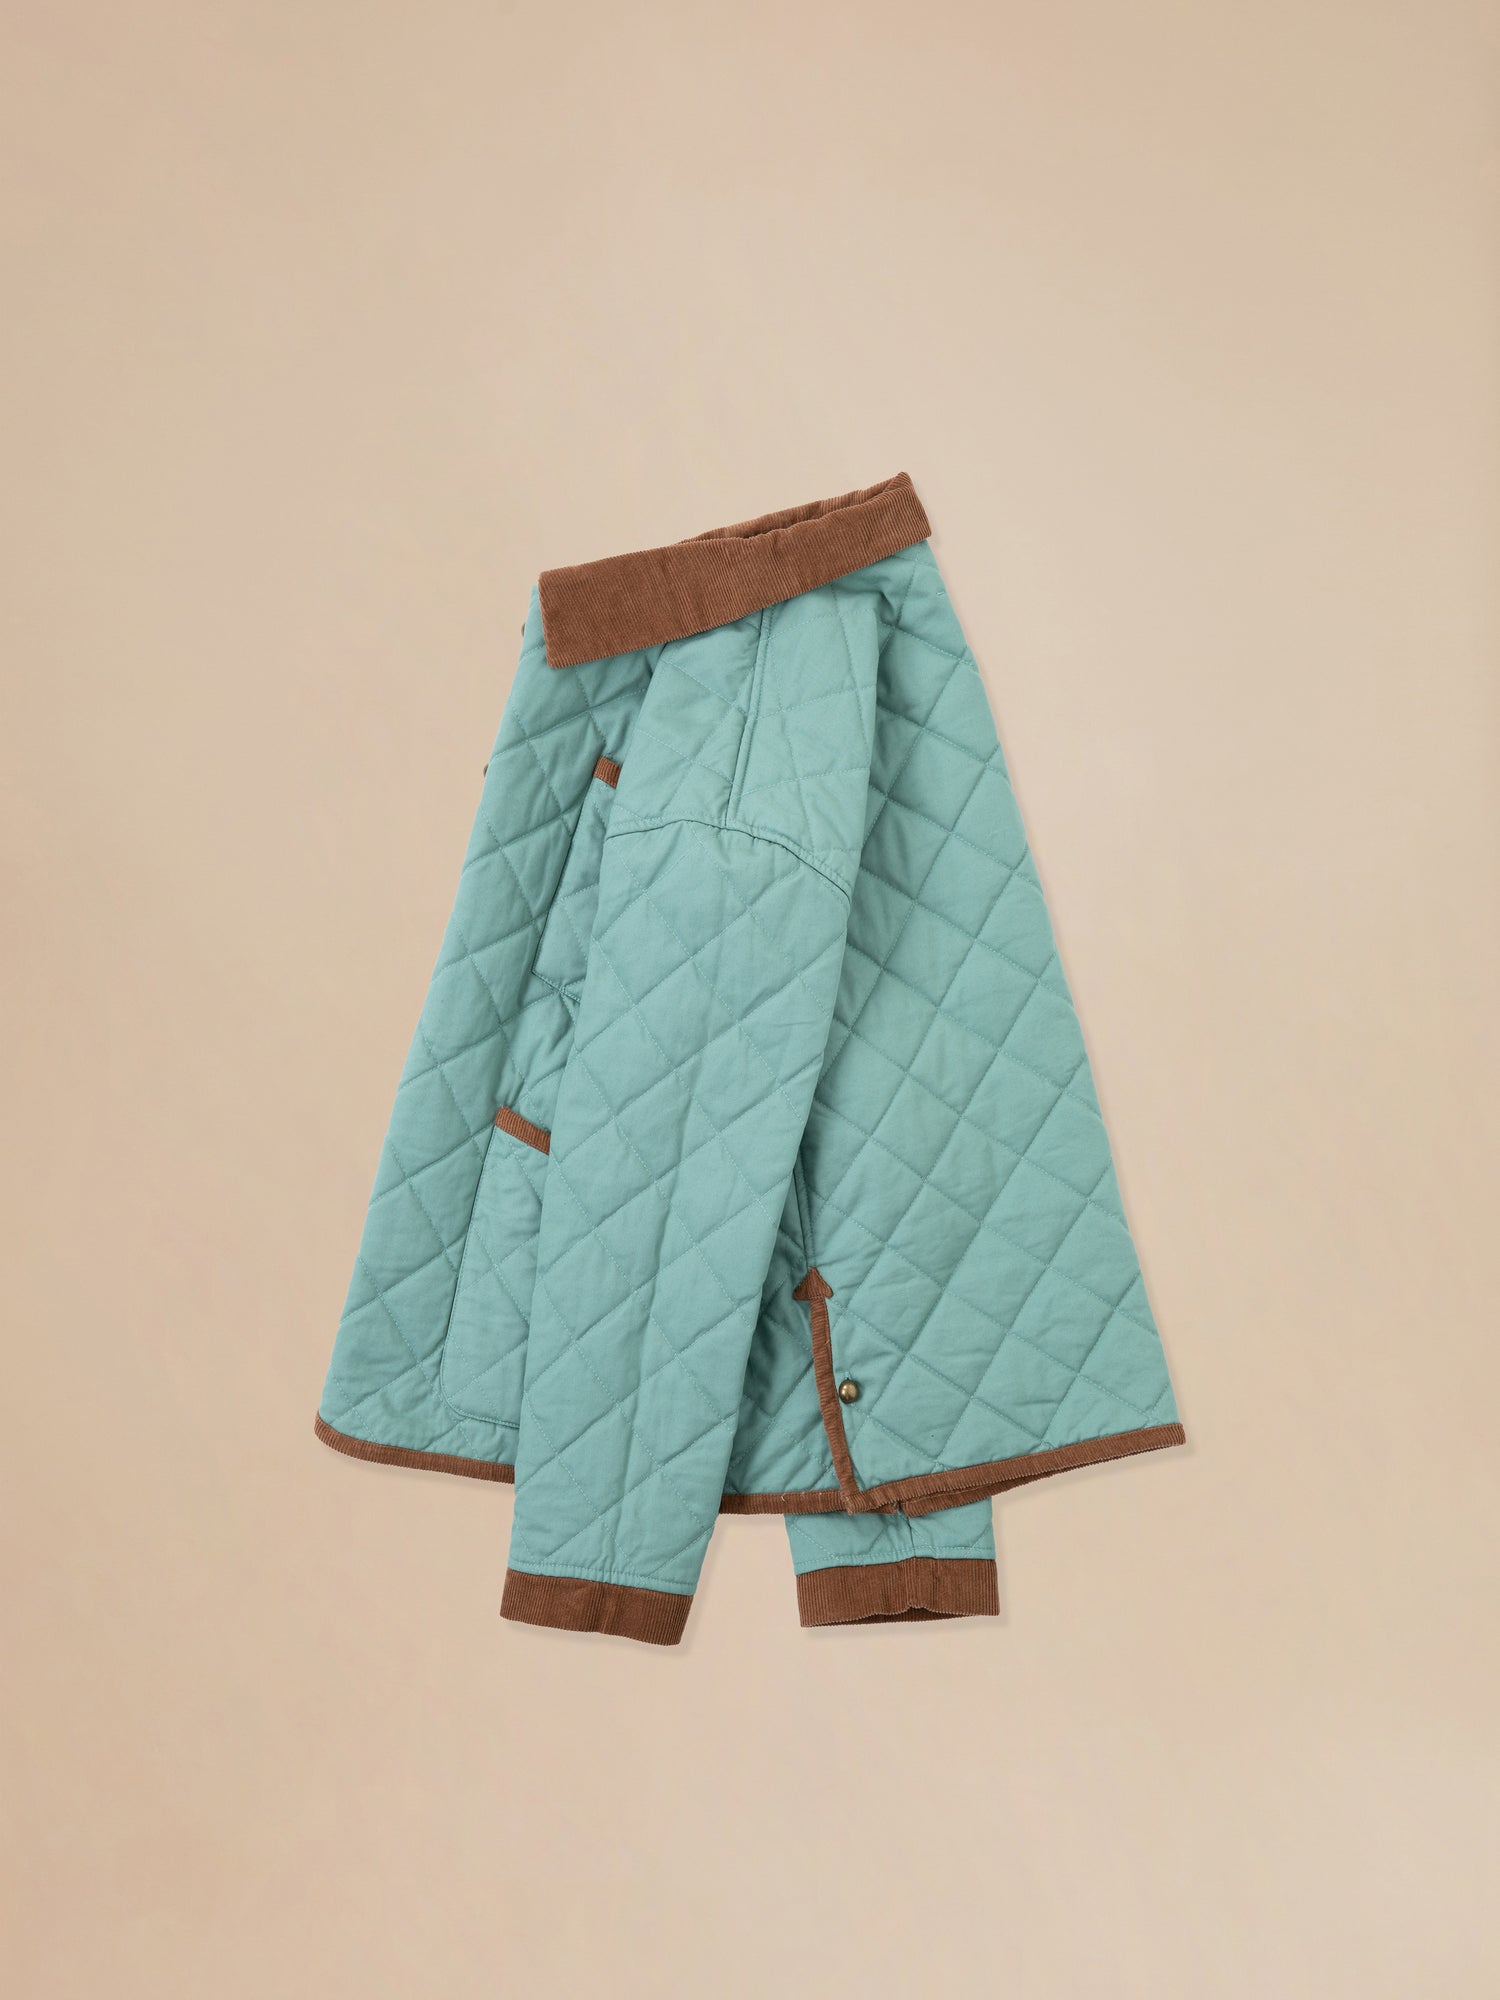 A Kashmir Meadow Quilt Jacket with brown trim by Found.